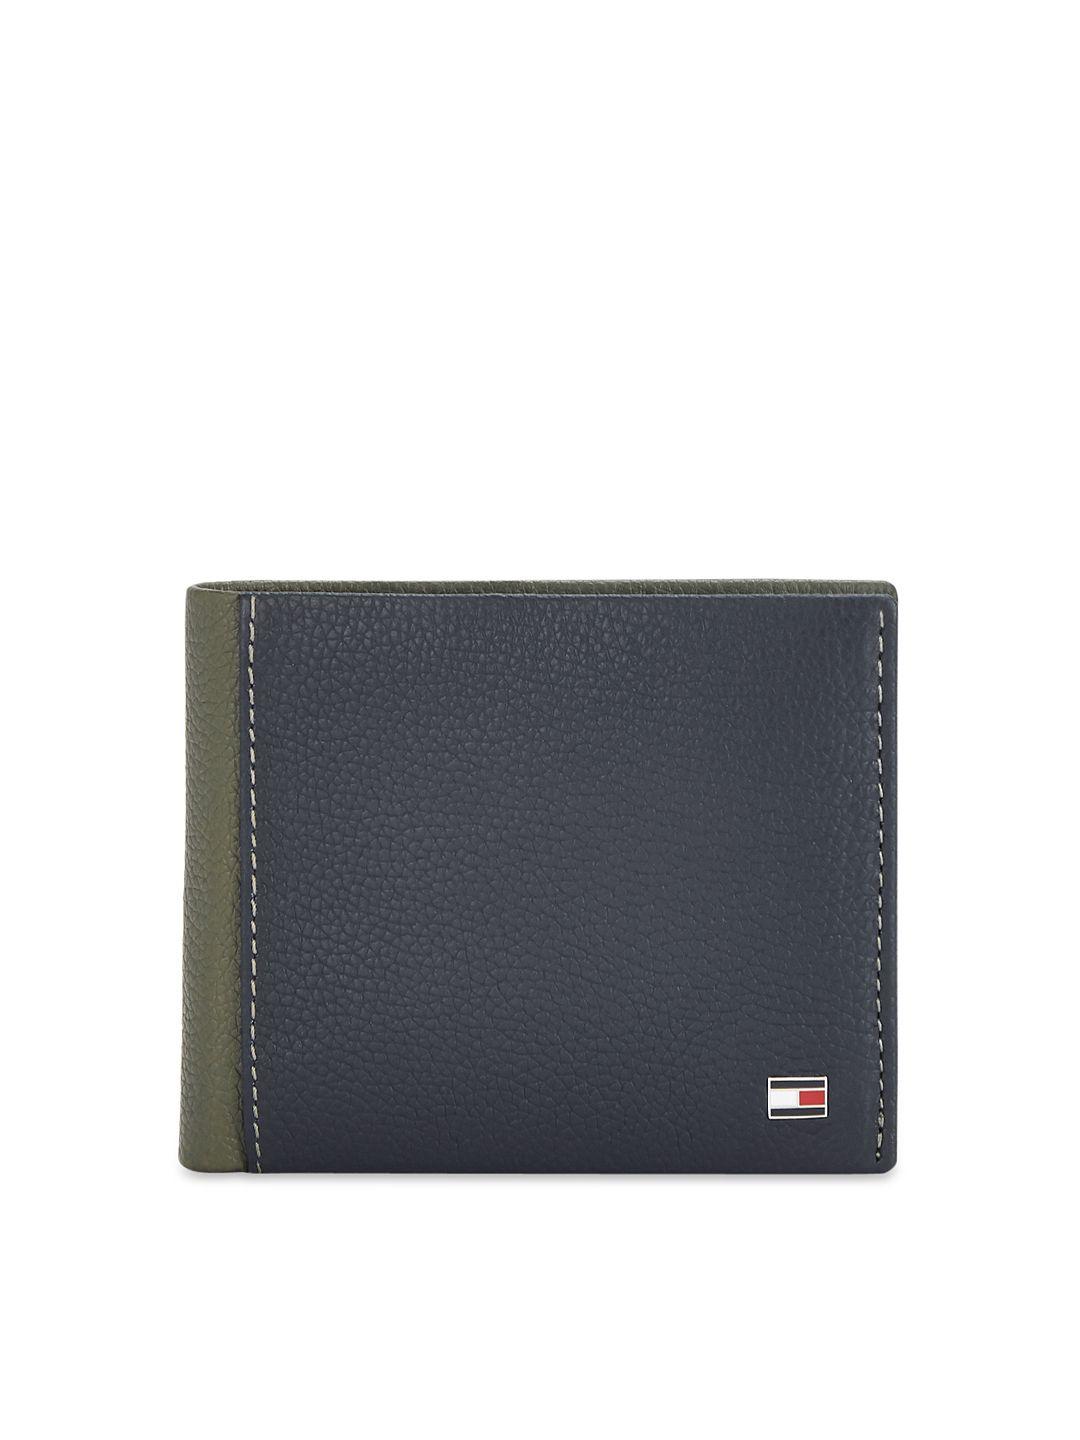 tommy hilfiger men olive green & navy blue colourblocked two fold leather wallet